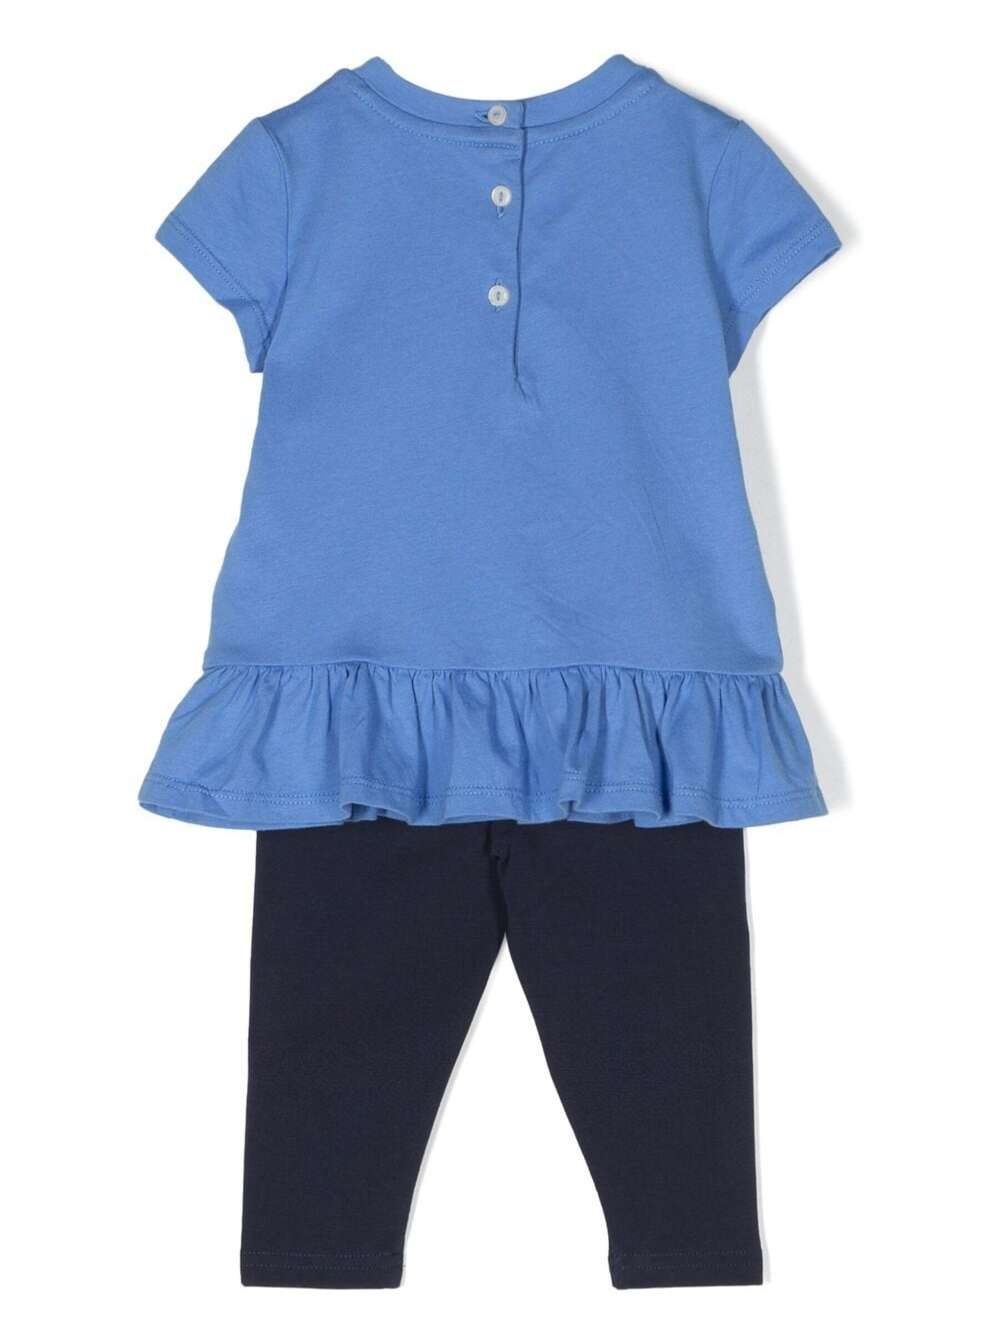 Shop Polo Ralph Lauren Blue And Black Set With Top And Leggings With Teddy Bear Print In Cotton Baby